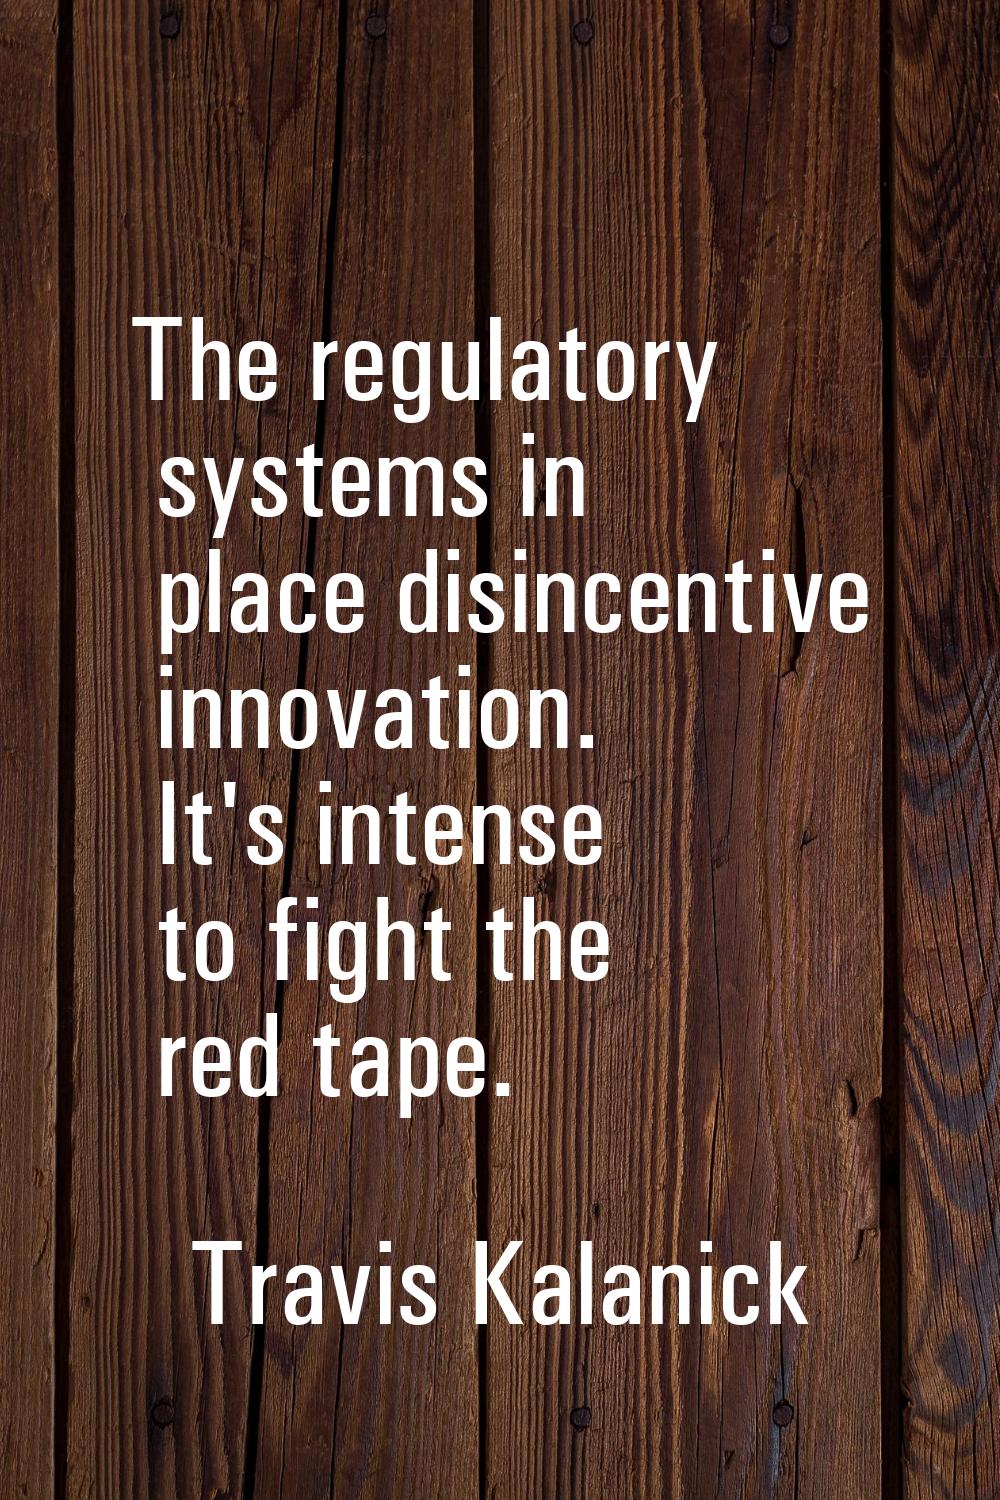 The regulatory systems in place disincentive innovation. It's intense to fight the red tape.